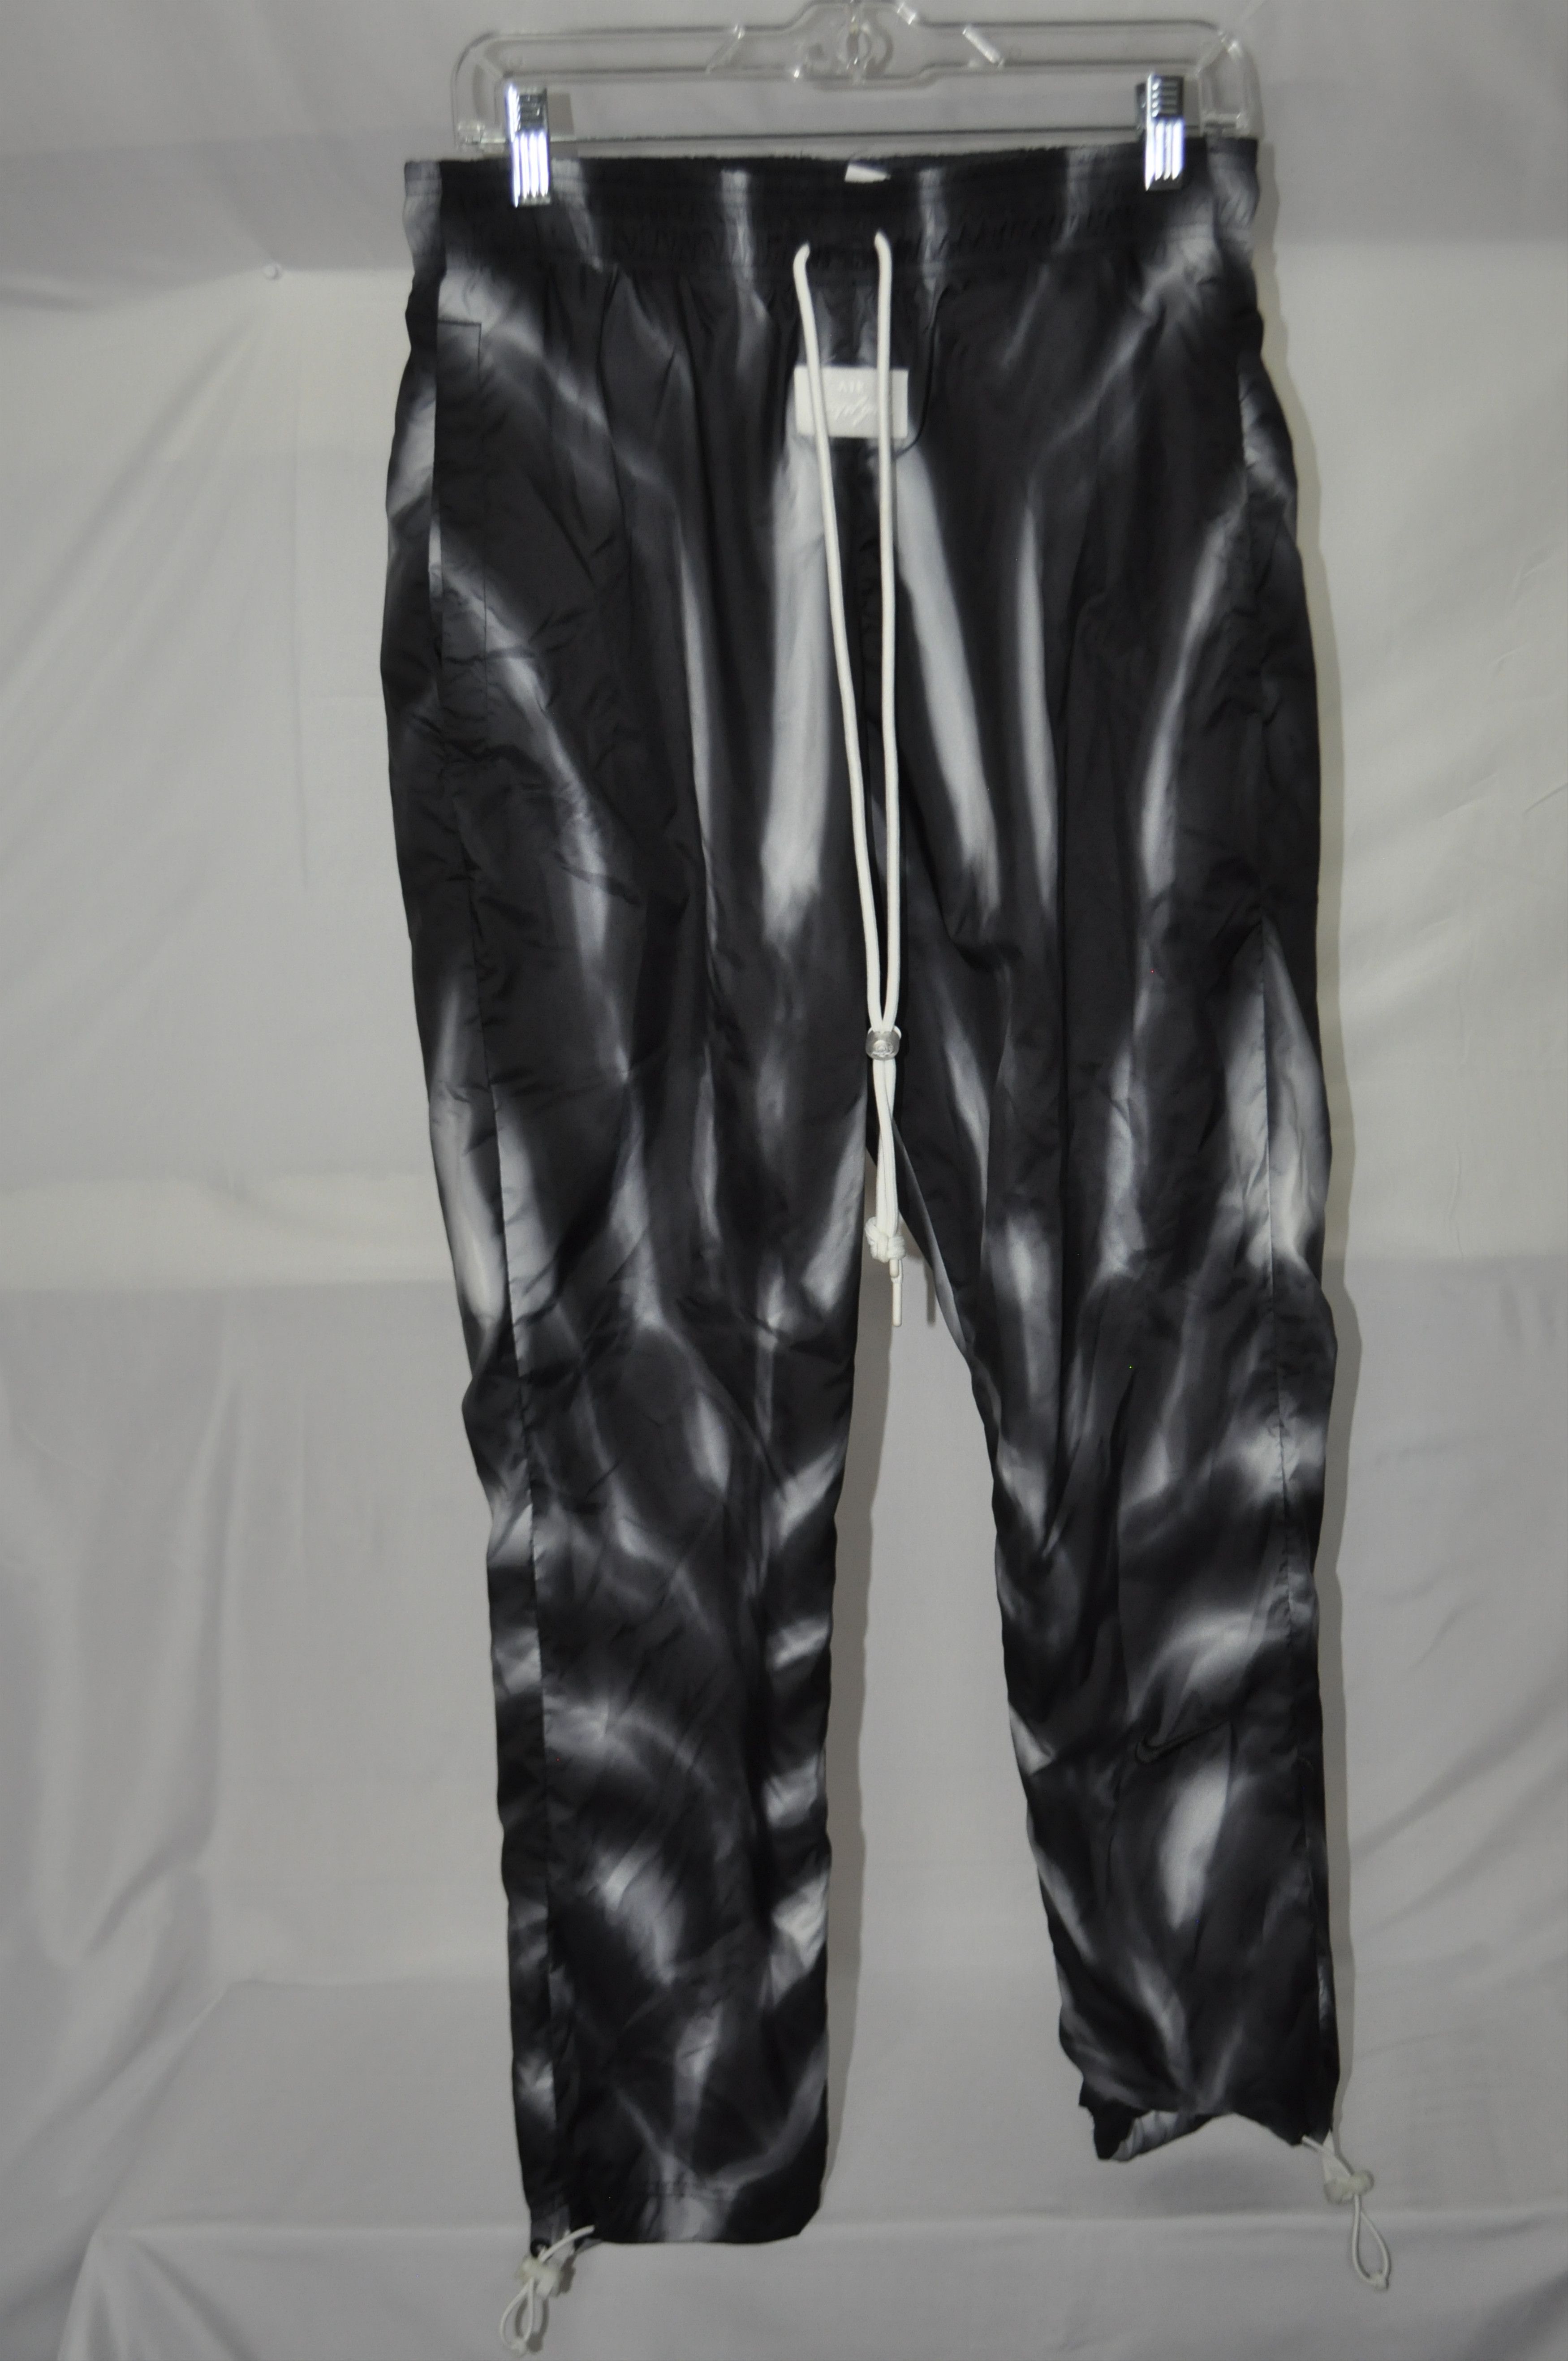 KicksFinder on X: Ad: Nike x Fear of God Allover Print Pants now